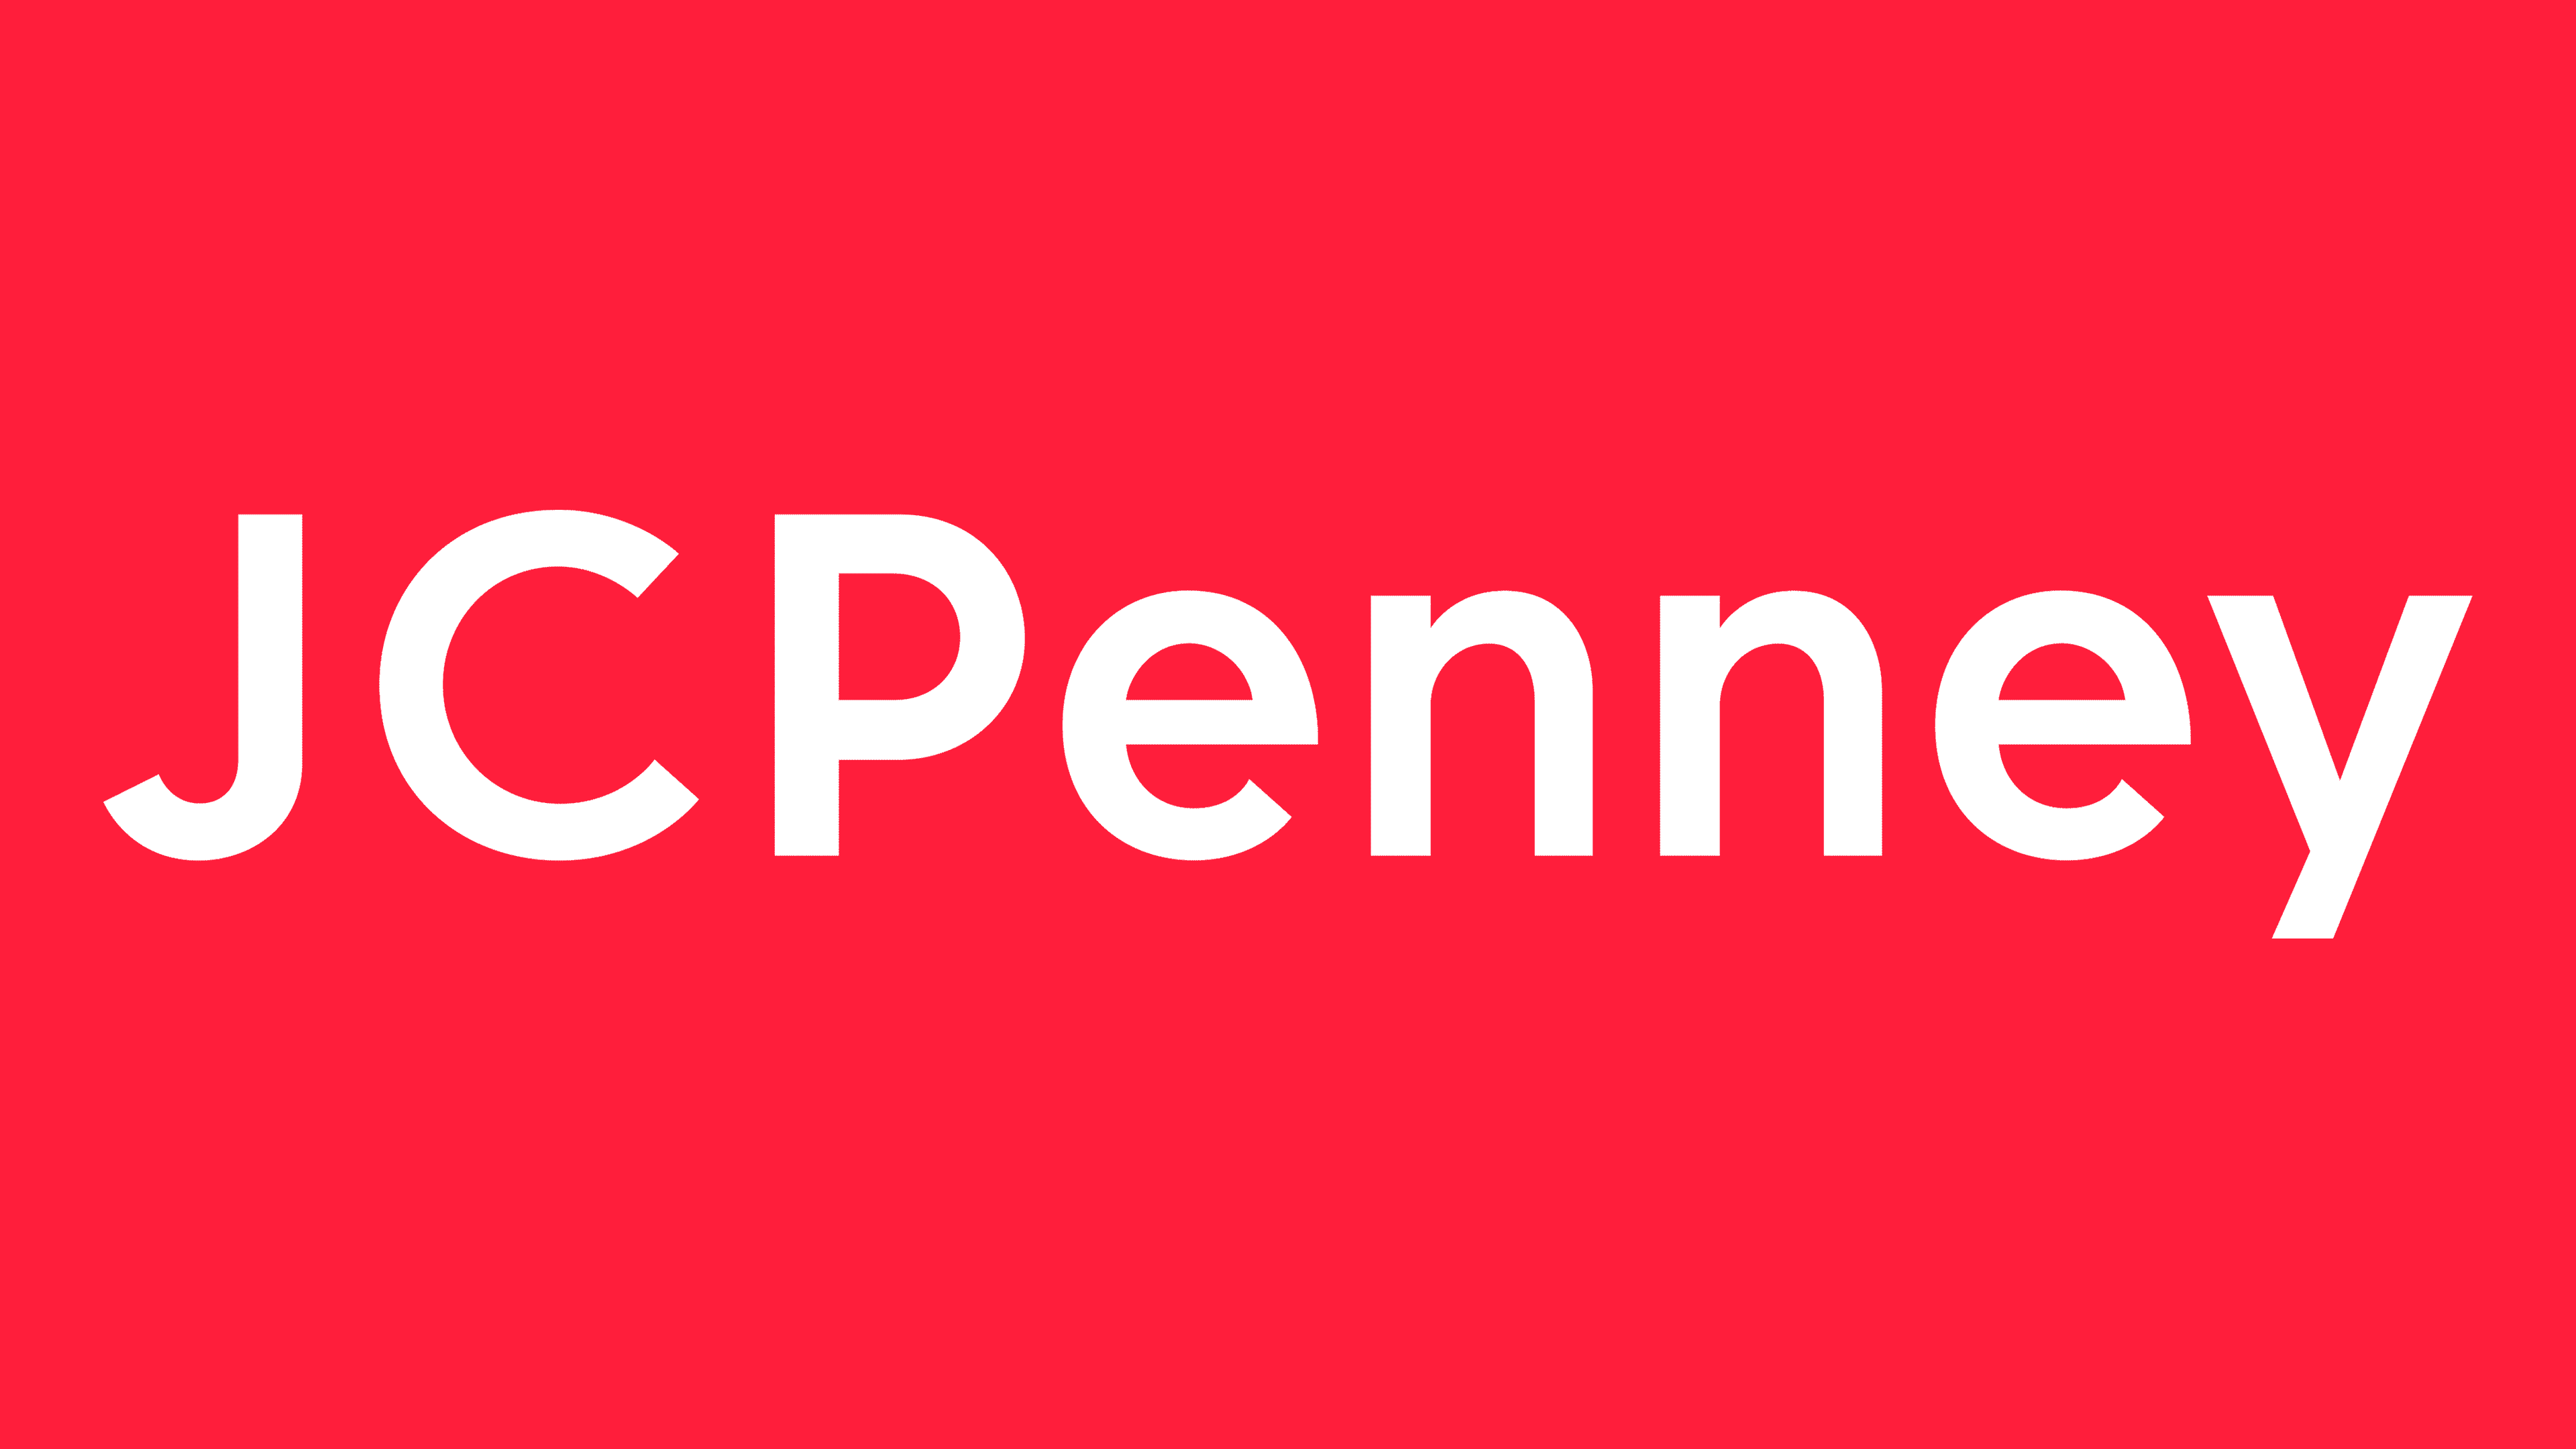 JCPenney Coupon Codes